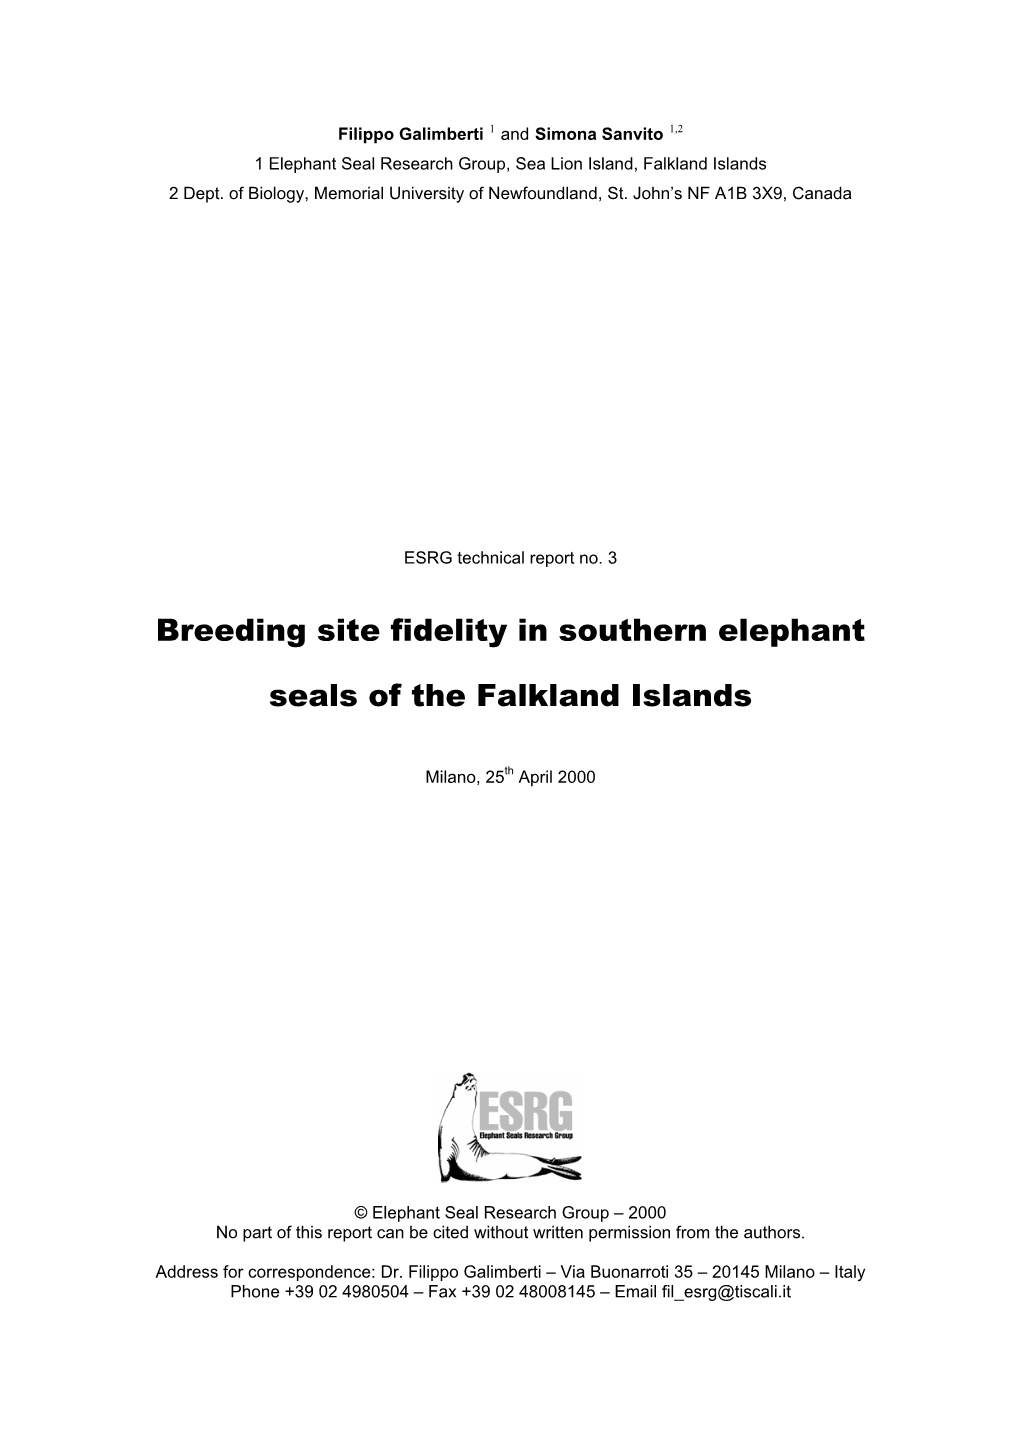 Breeding Site Fidelity in Southern Elephant Seals of the Falkland Islands